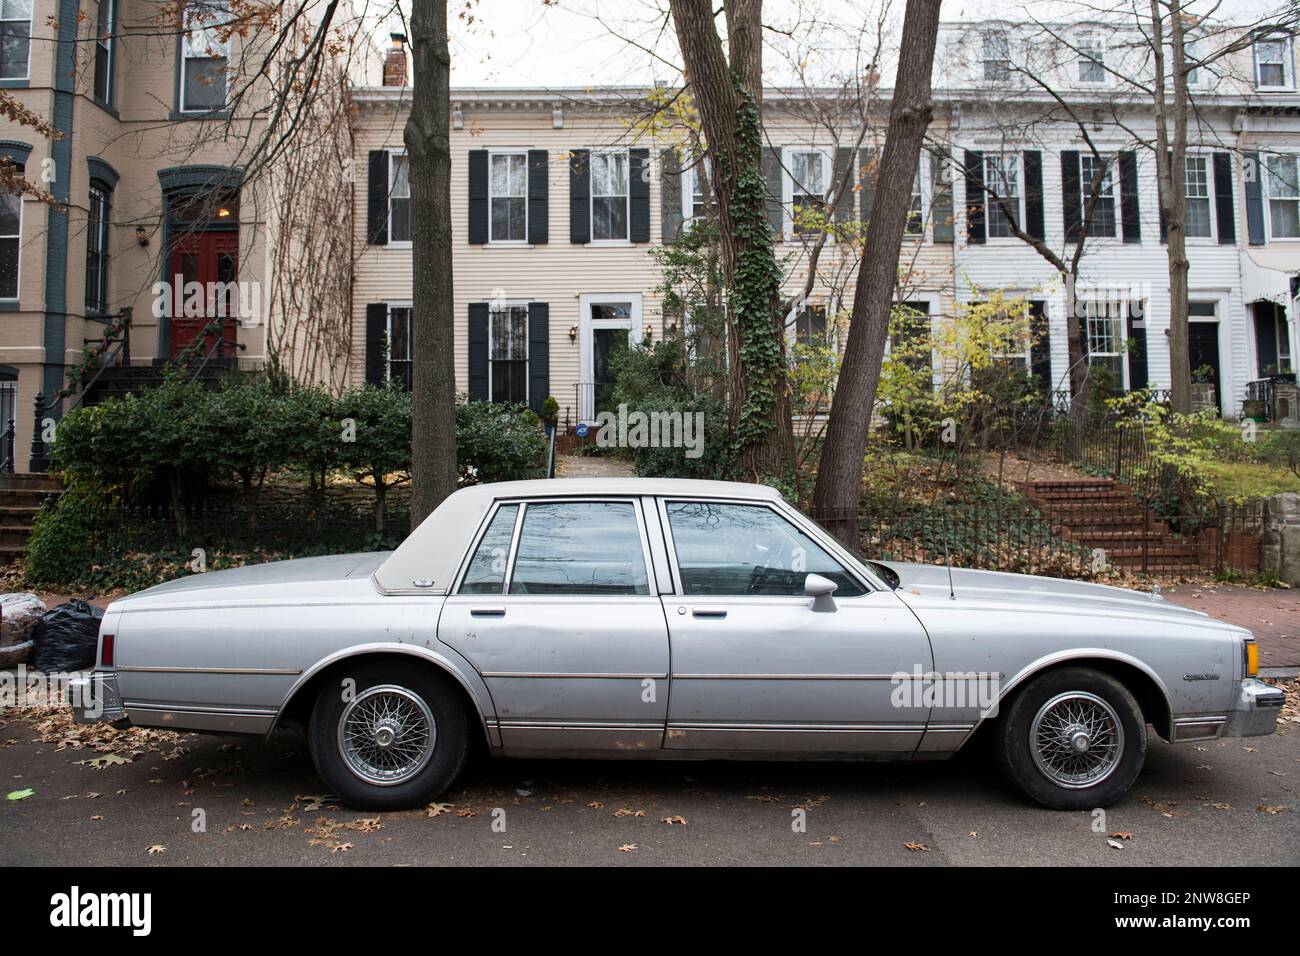 UNITED STATES - DECEMBER 4: A Chevrolet Caprice Classic is pictured on 3rd  St. NE, on Capitol